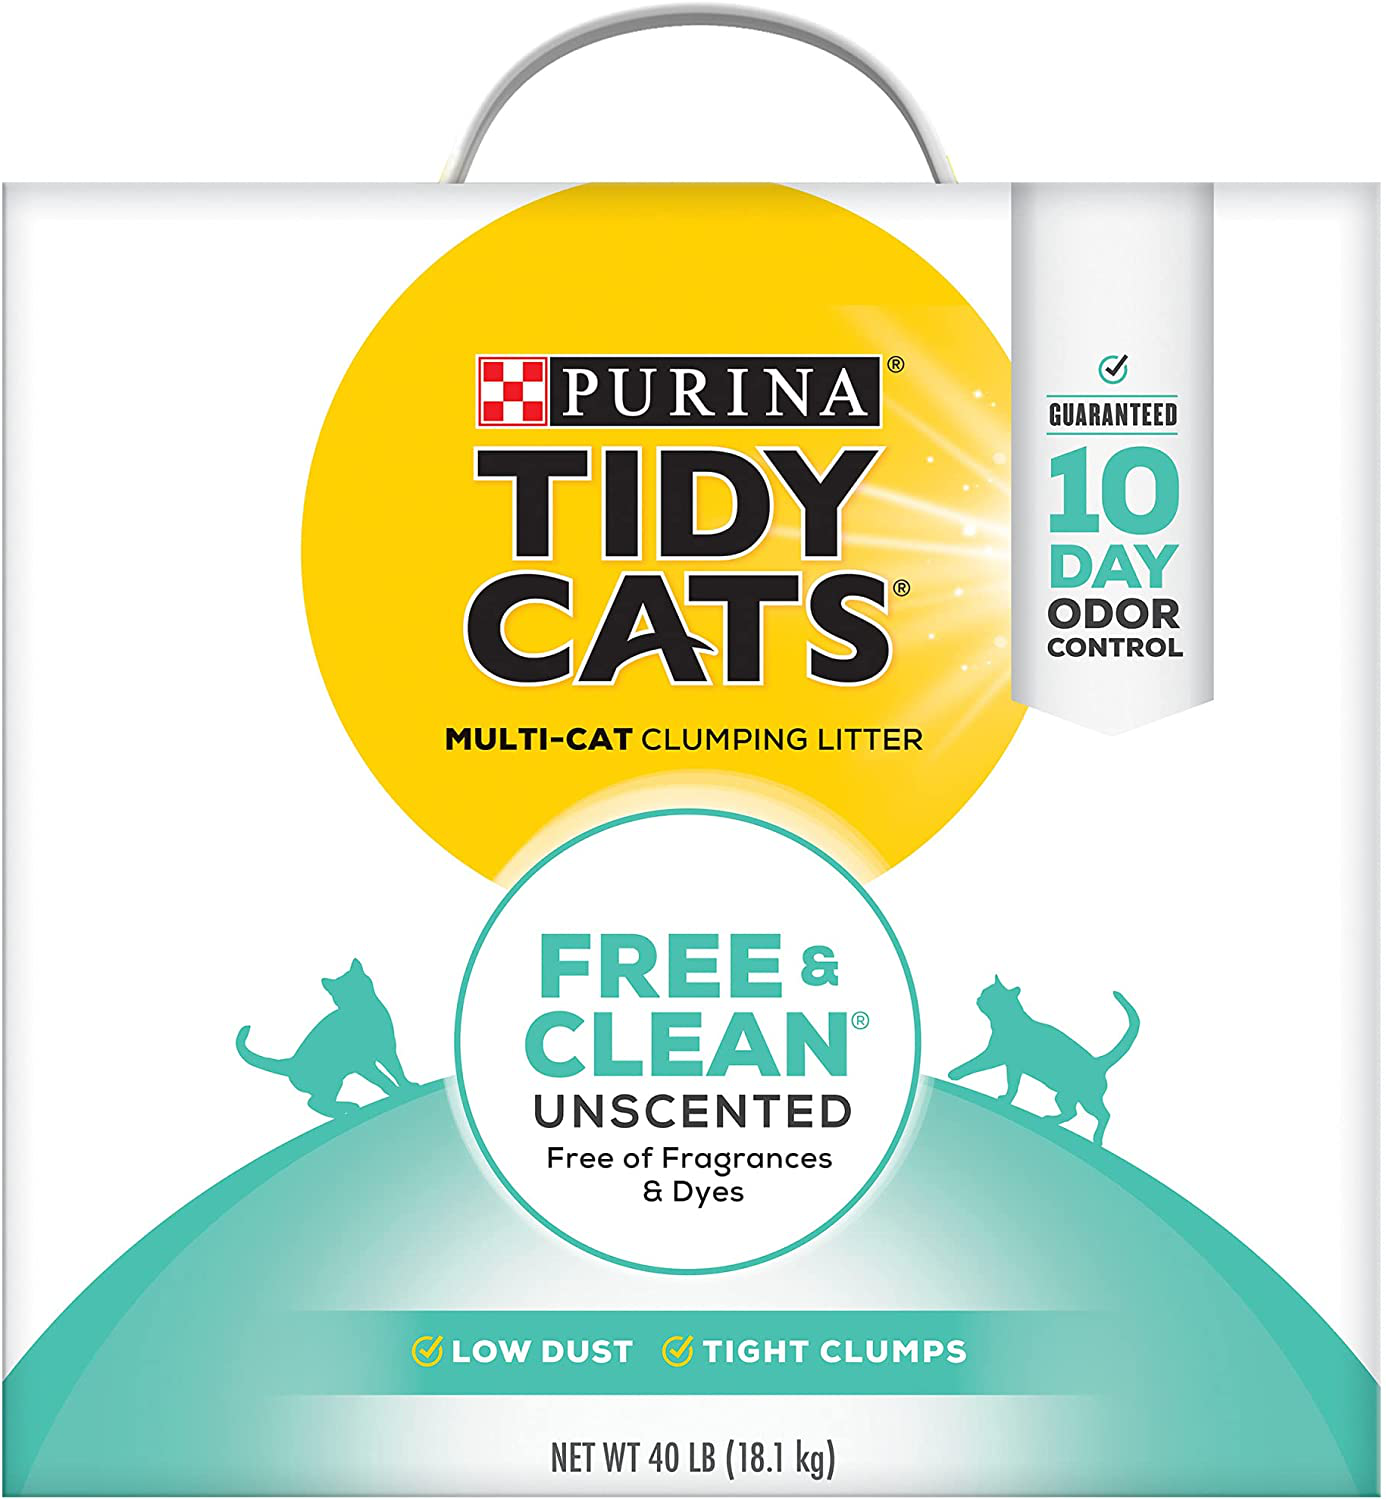 Purina Tidy Cats Clumping Cat Litter; Free & Clean Unscented Multi Cat Litter - 40 Lb. Box Animals & Pet Supplies > Pet Supplies > Cat Supplies > Cat Litter Purina Tidy Cats   